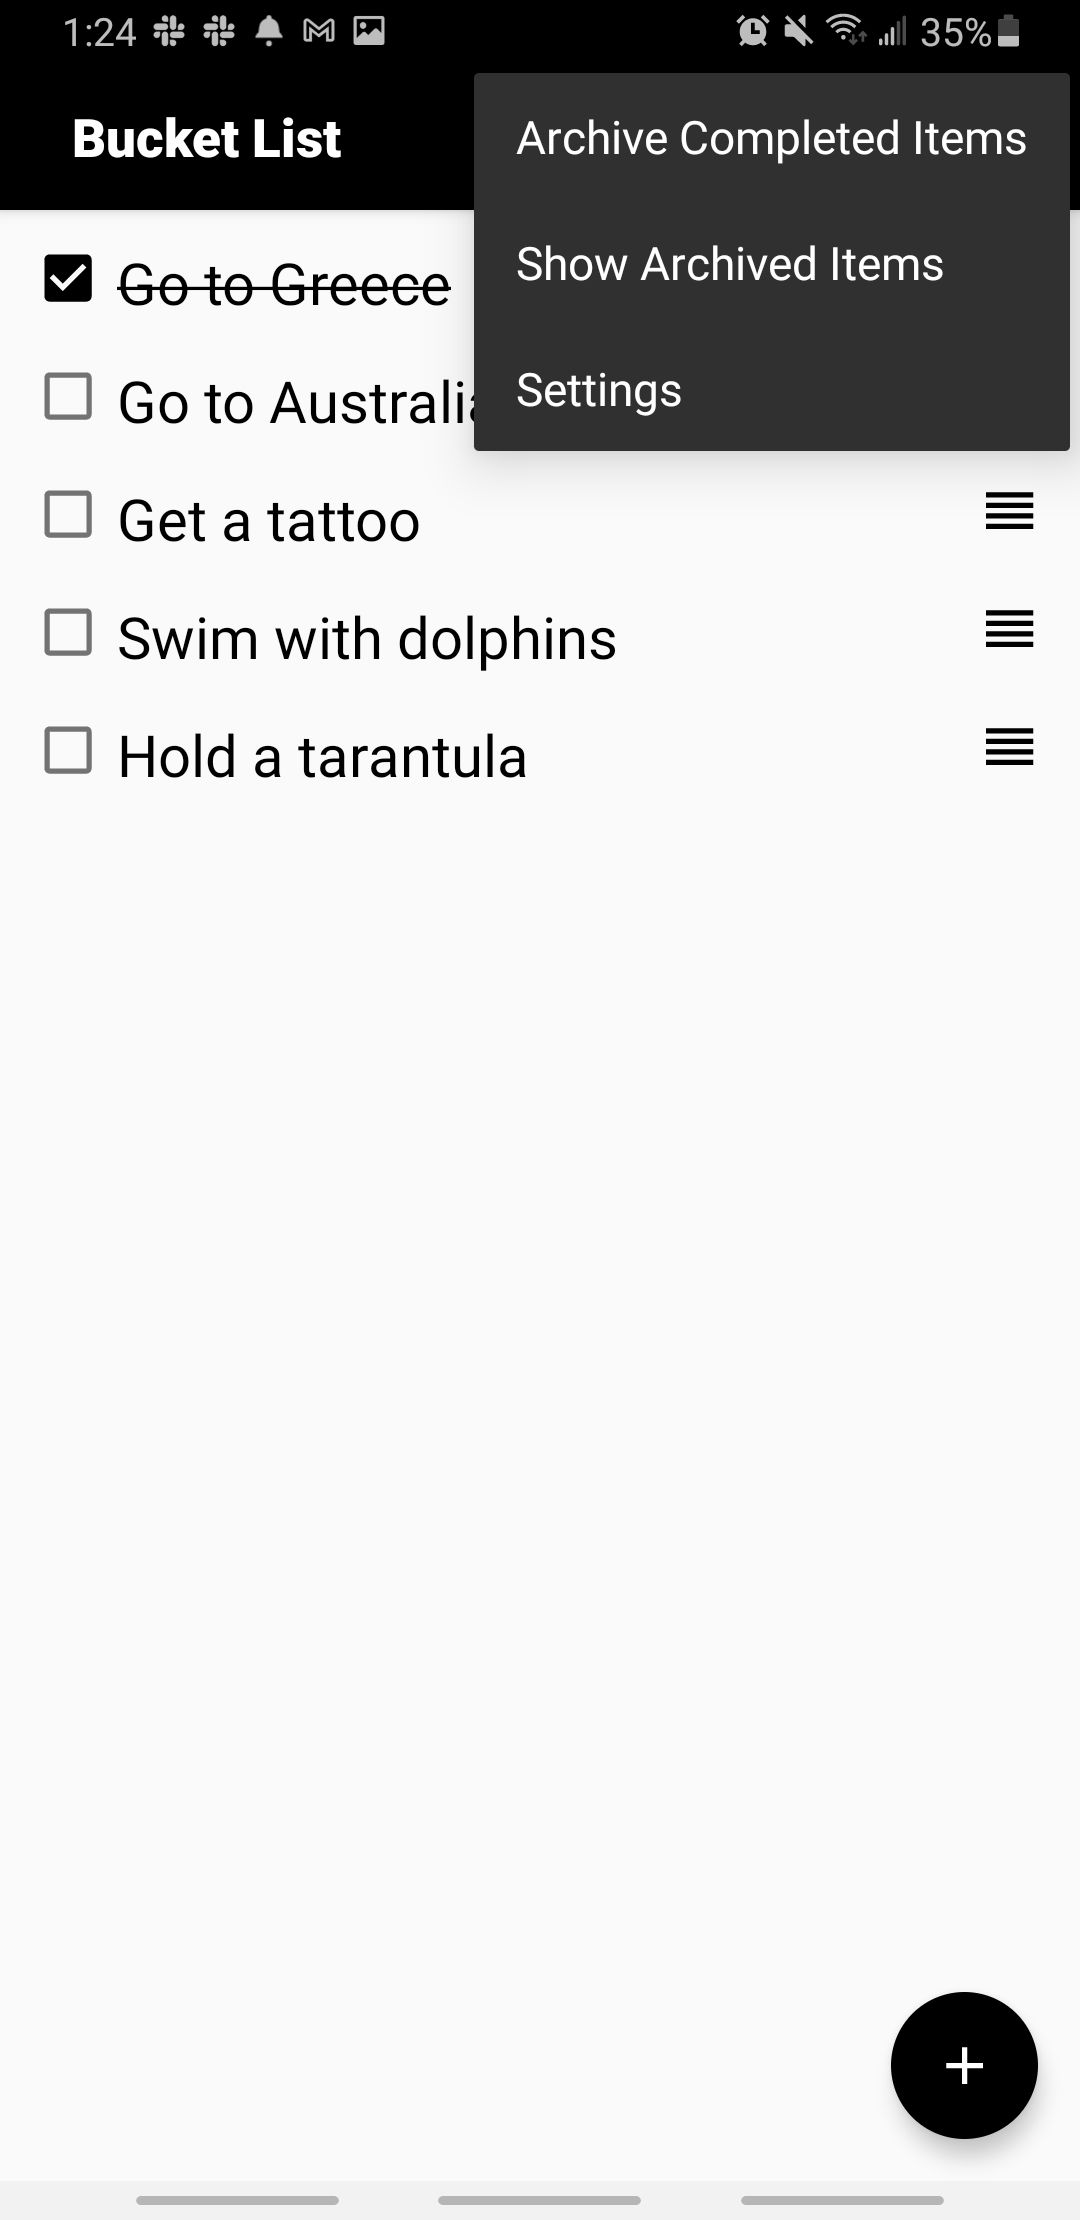 simple bucket list app showing crossed off item and archive settings